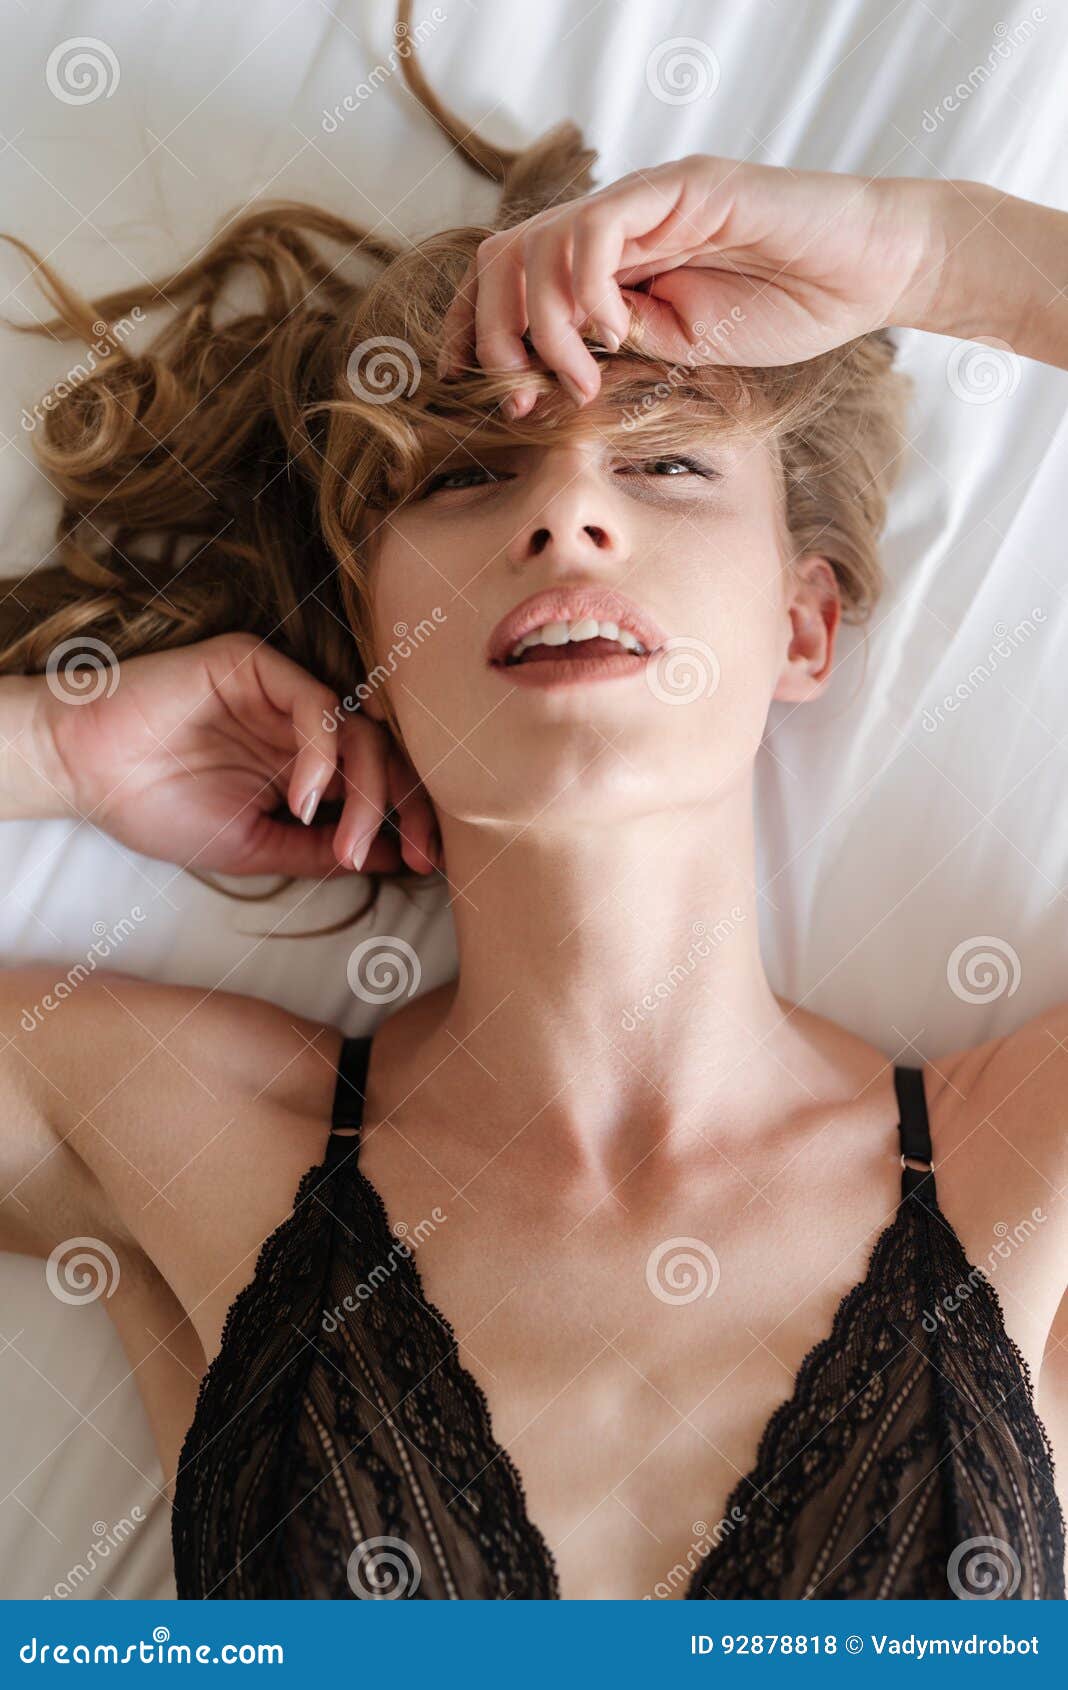 view-above-woman-lying-bed-sexy-looking-camera-vertical-photo-92878818.jpg